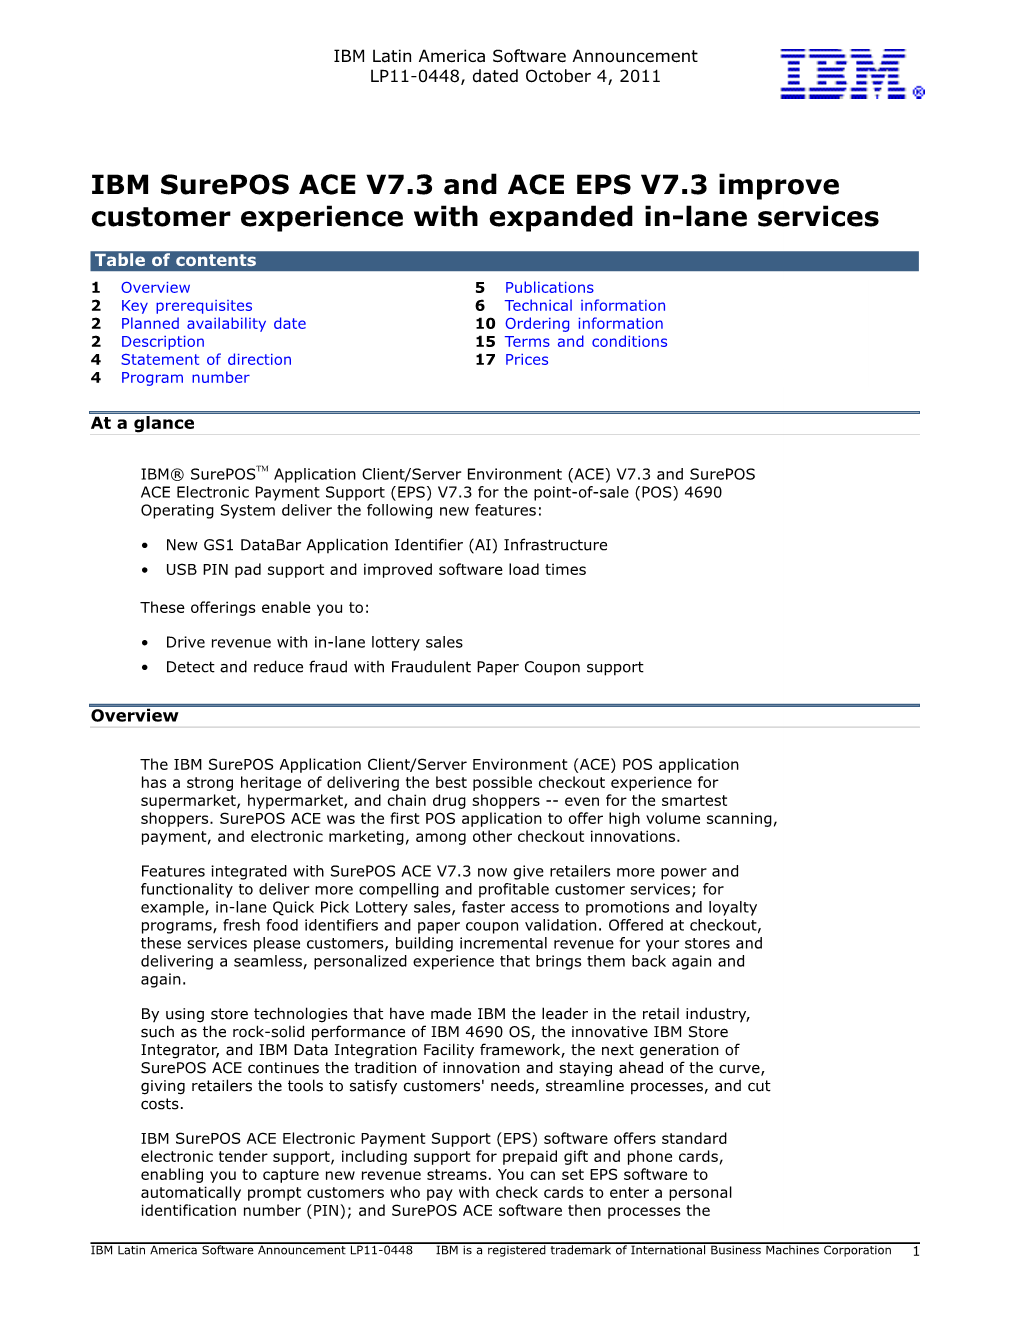 IBM Surepos ACE V7.3 and ACE EPS V7.3 Improve Customer Experience with Expanded In-Lane Services